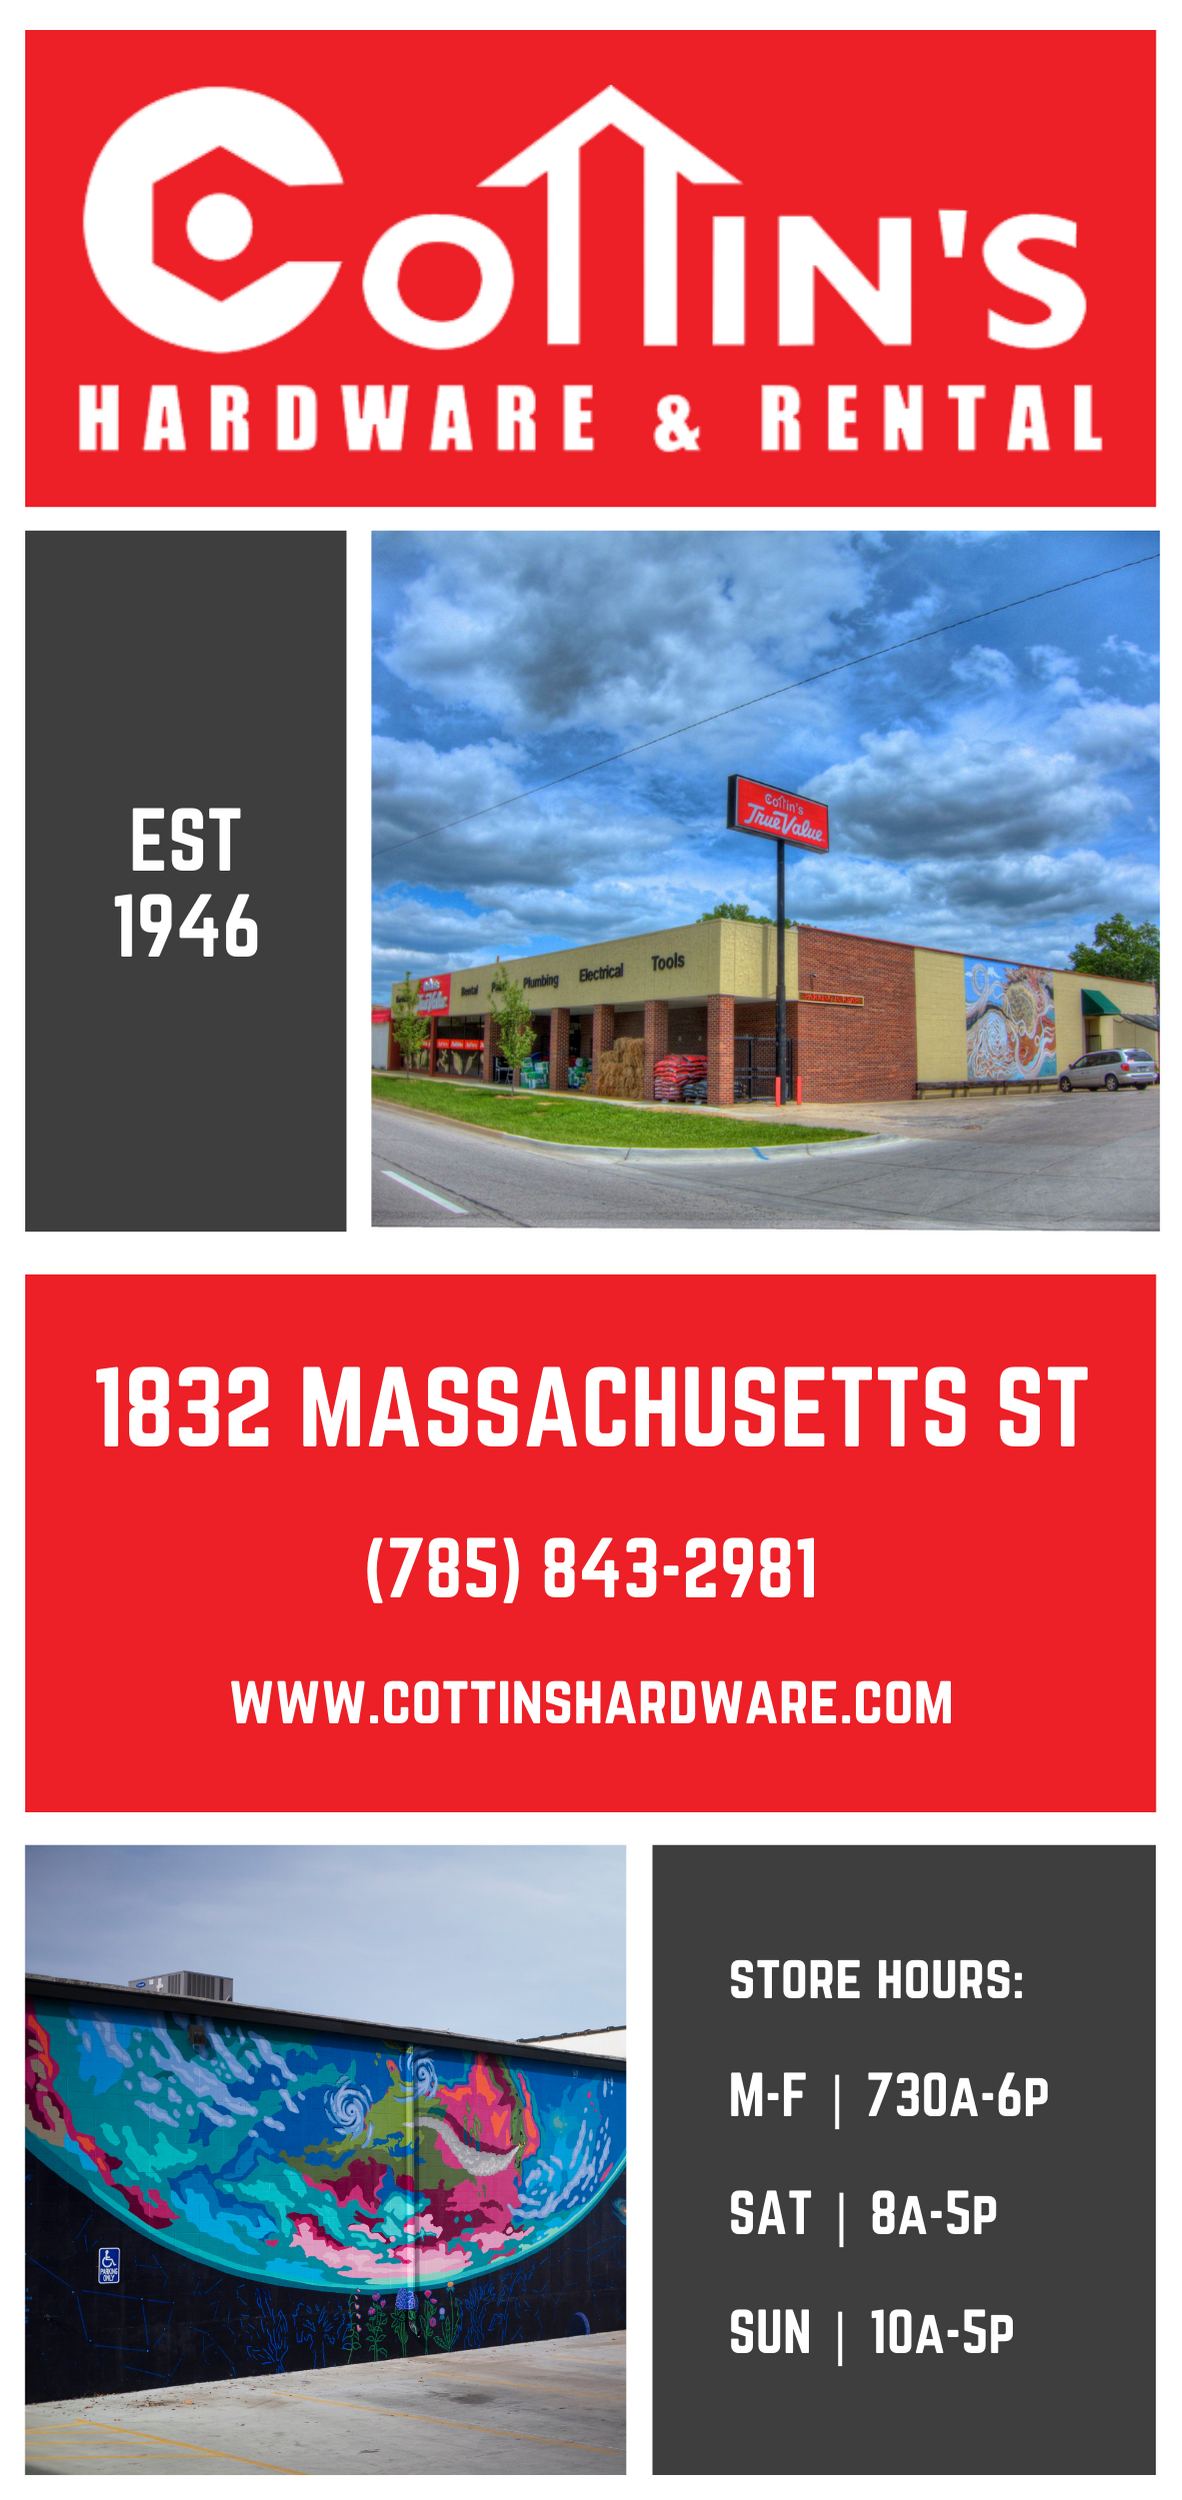 Cottin's Hardware Ad (two thirds vertical).png